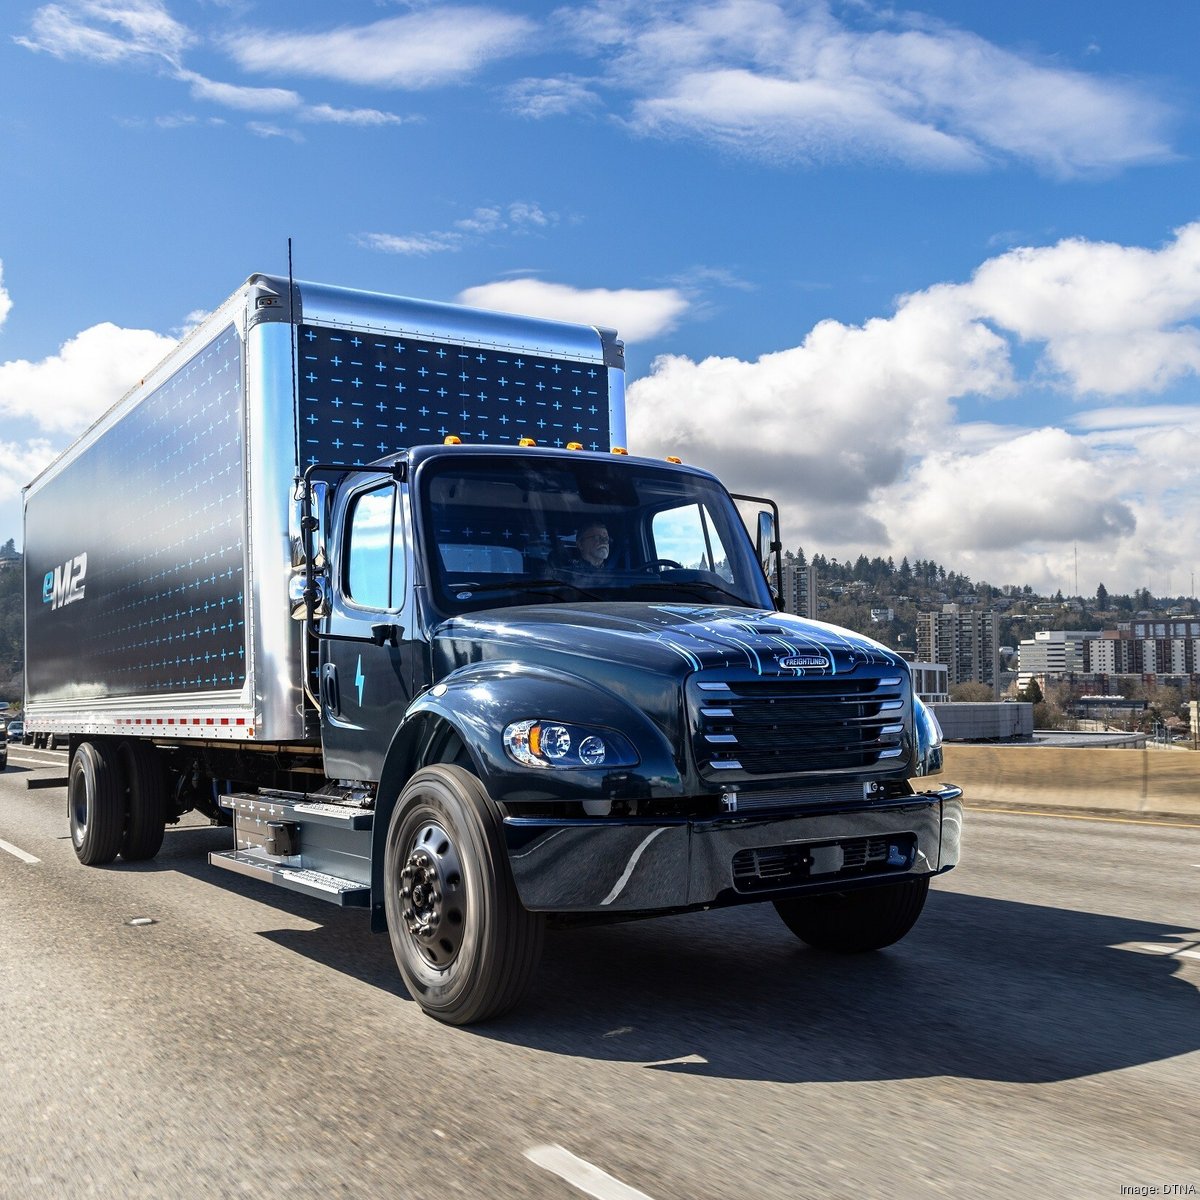 Production of New Freightliner Cascadia Ramps Up